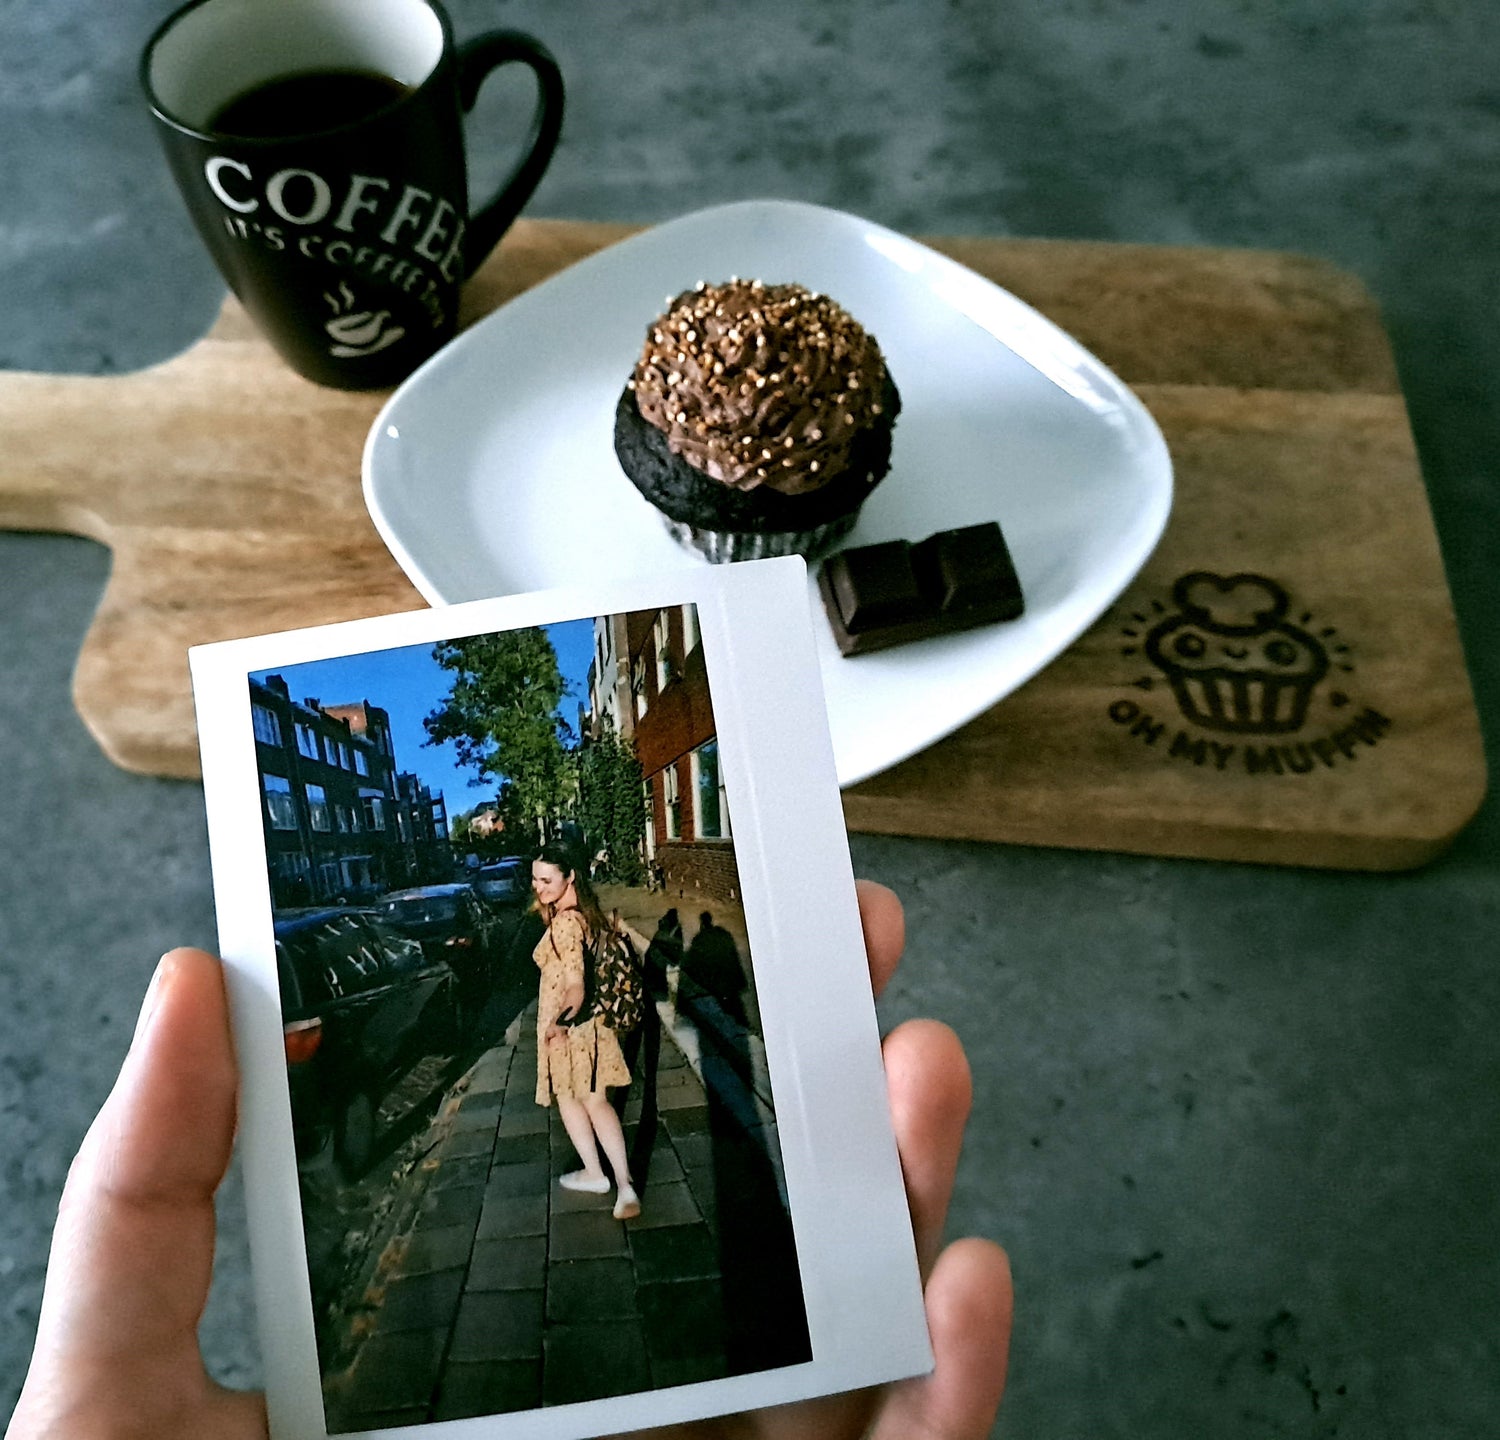 Second plan a cup of coffee and a vegan chocolate muffin on a wooden board. First plan a picture held in hand